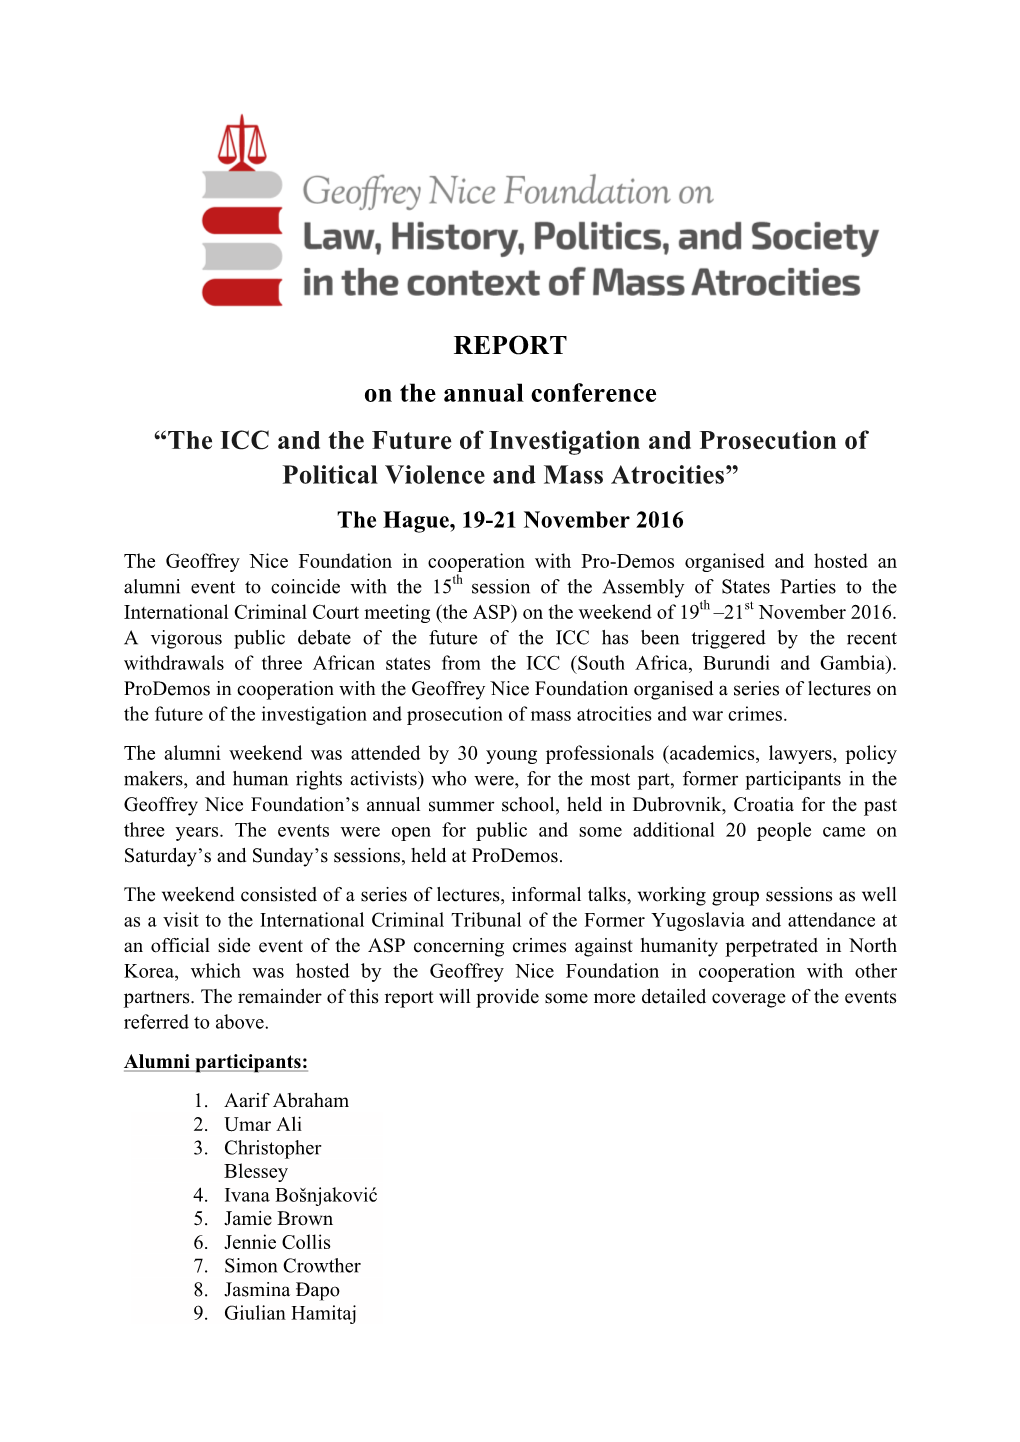 REPORT on the Annual Conference “The ICC and the Future of Investigation and Prosecution of Political Violence and Mass Atroc